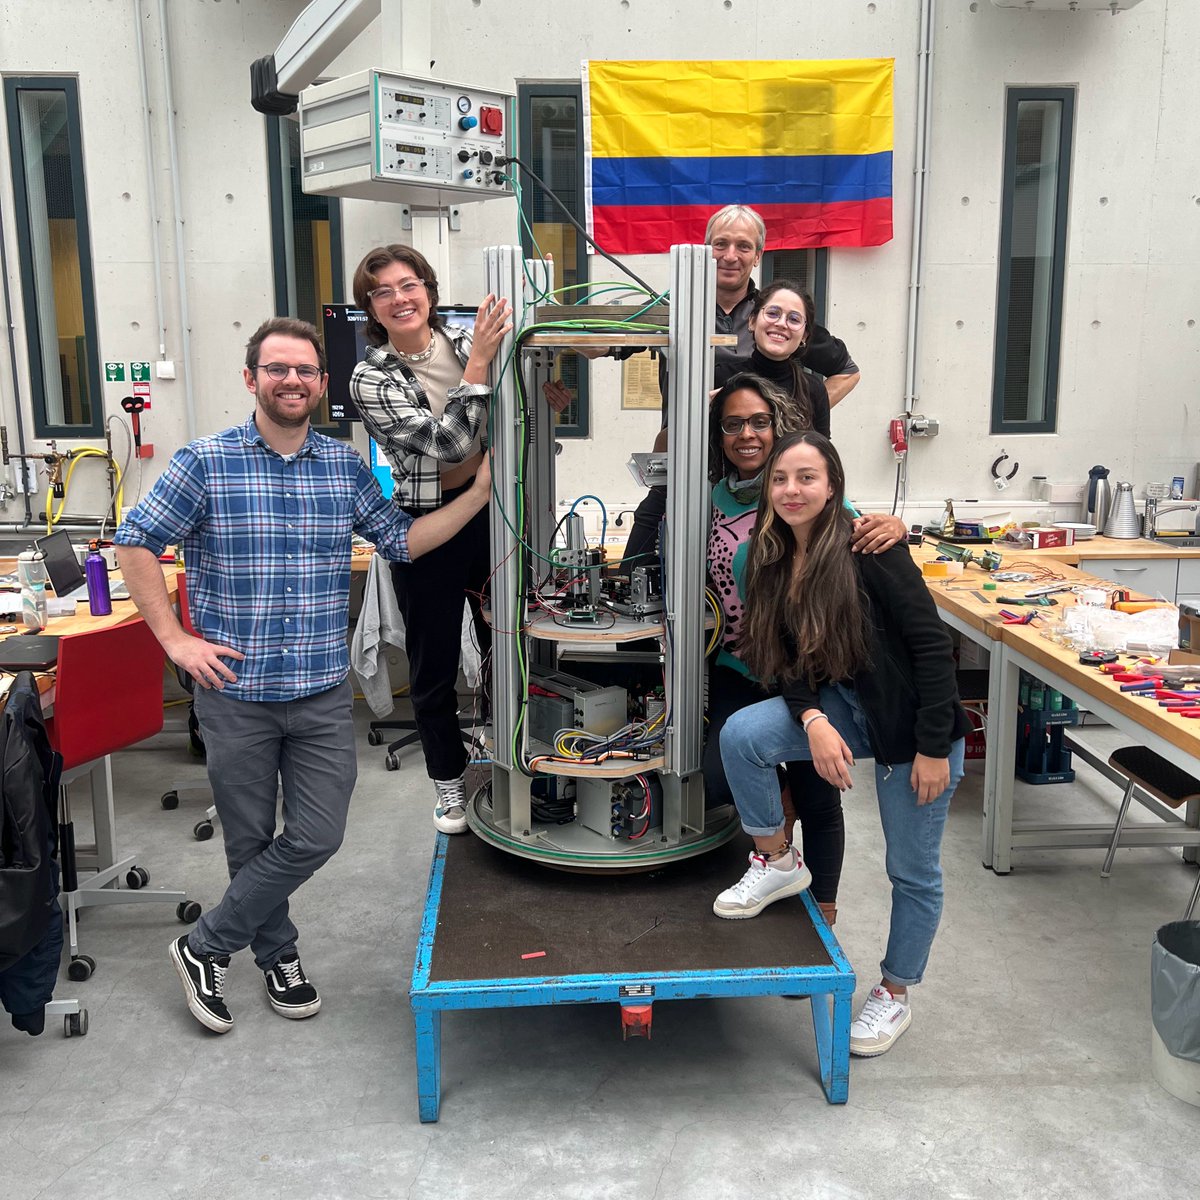 Team #Veragravitas, an all-female team from @UdeA 🇨🇴 is preparing for their #DropTES experiment!  

This week they integrated their autonomous soldering equipment with experts from @ZARM_de  

Stay tuned for more updates! 

#AccSpace4All #Space4SDGs